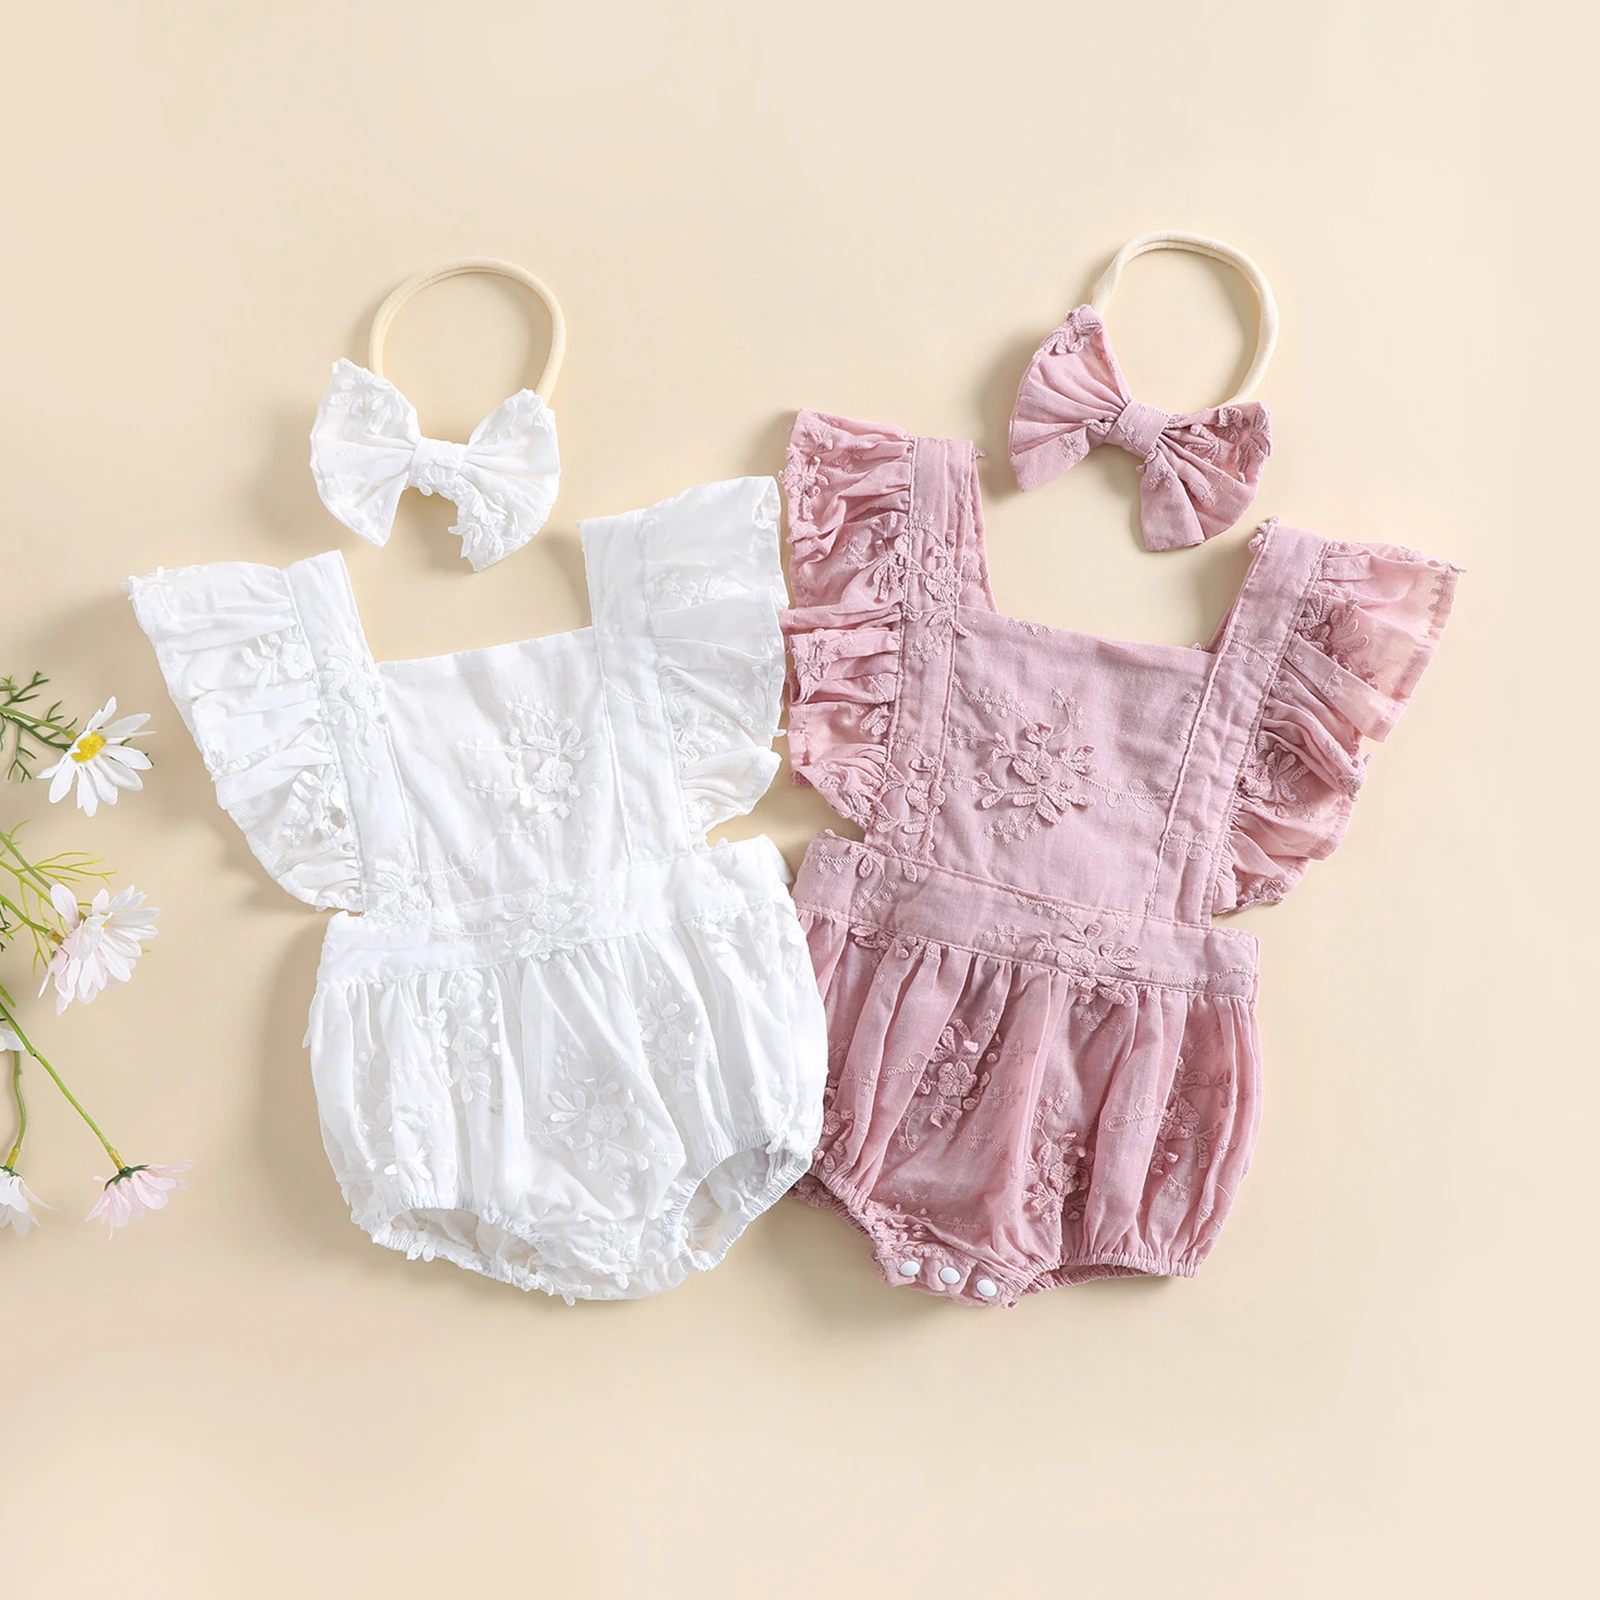 2Pcs Summer Baby Girl Rompers Newborn Baby Clothes Toddler Ruffle Lace Floral printed Jumpsuit With Headband coloured baby bodysuits